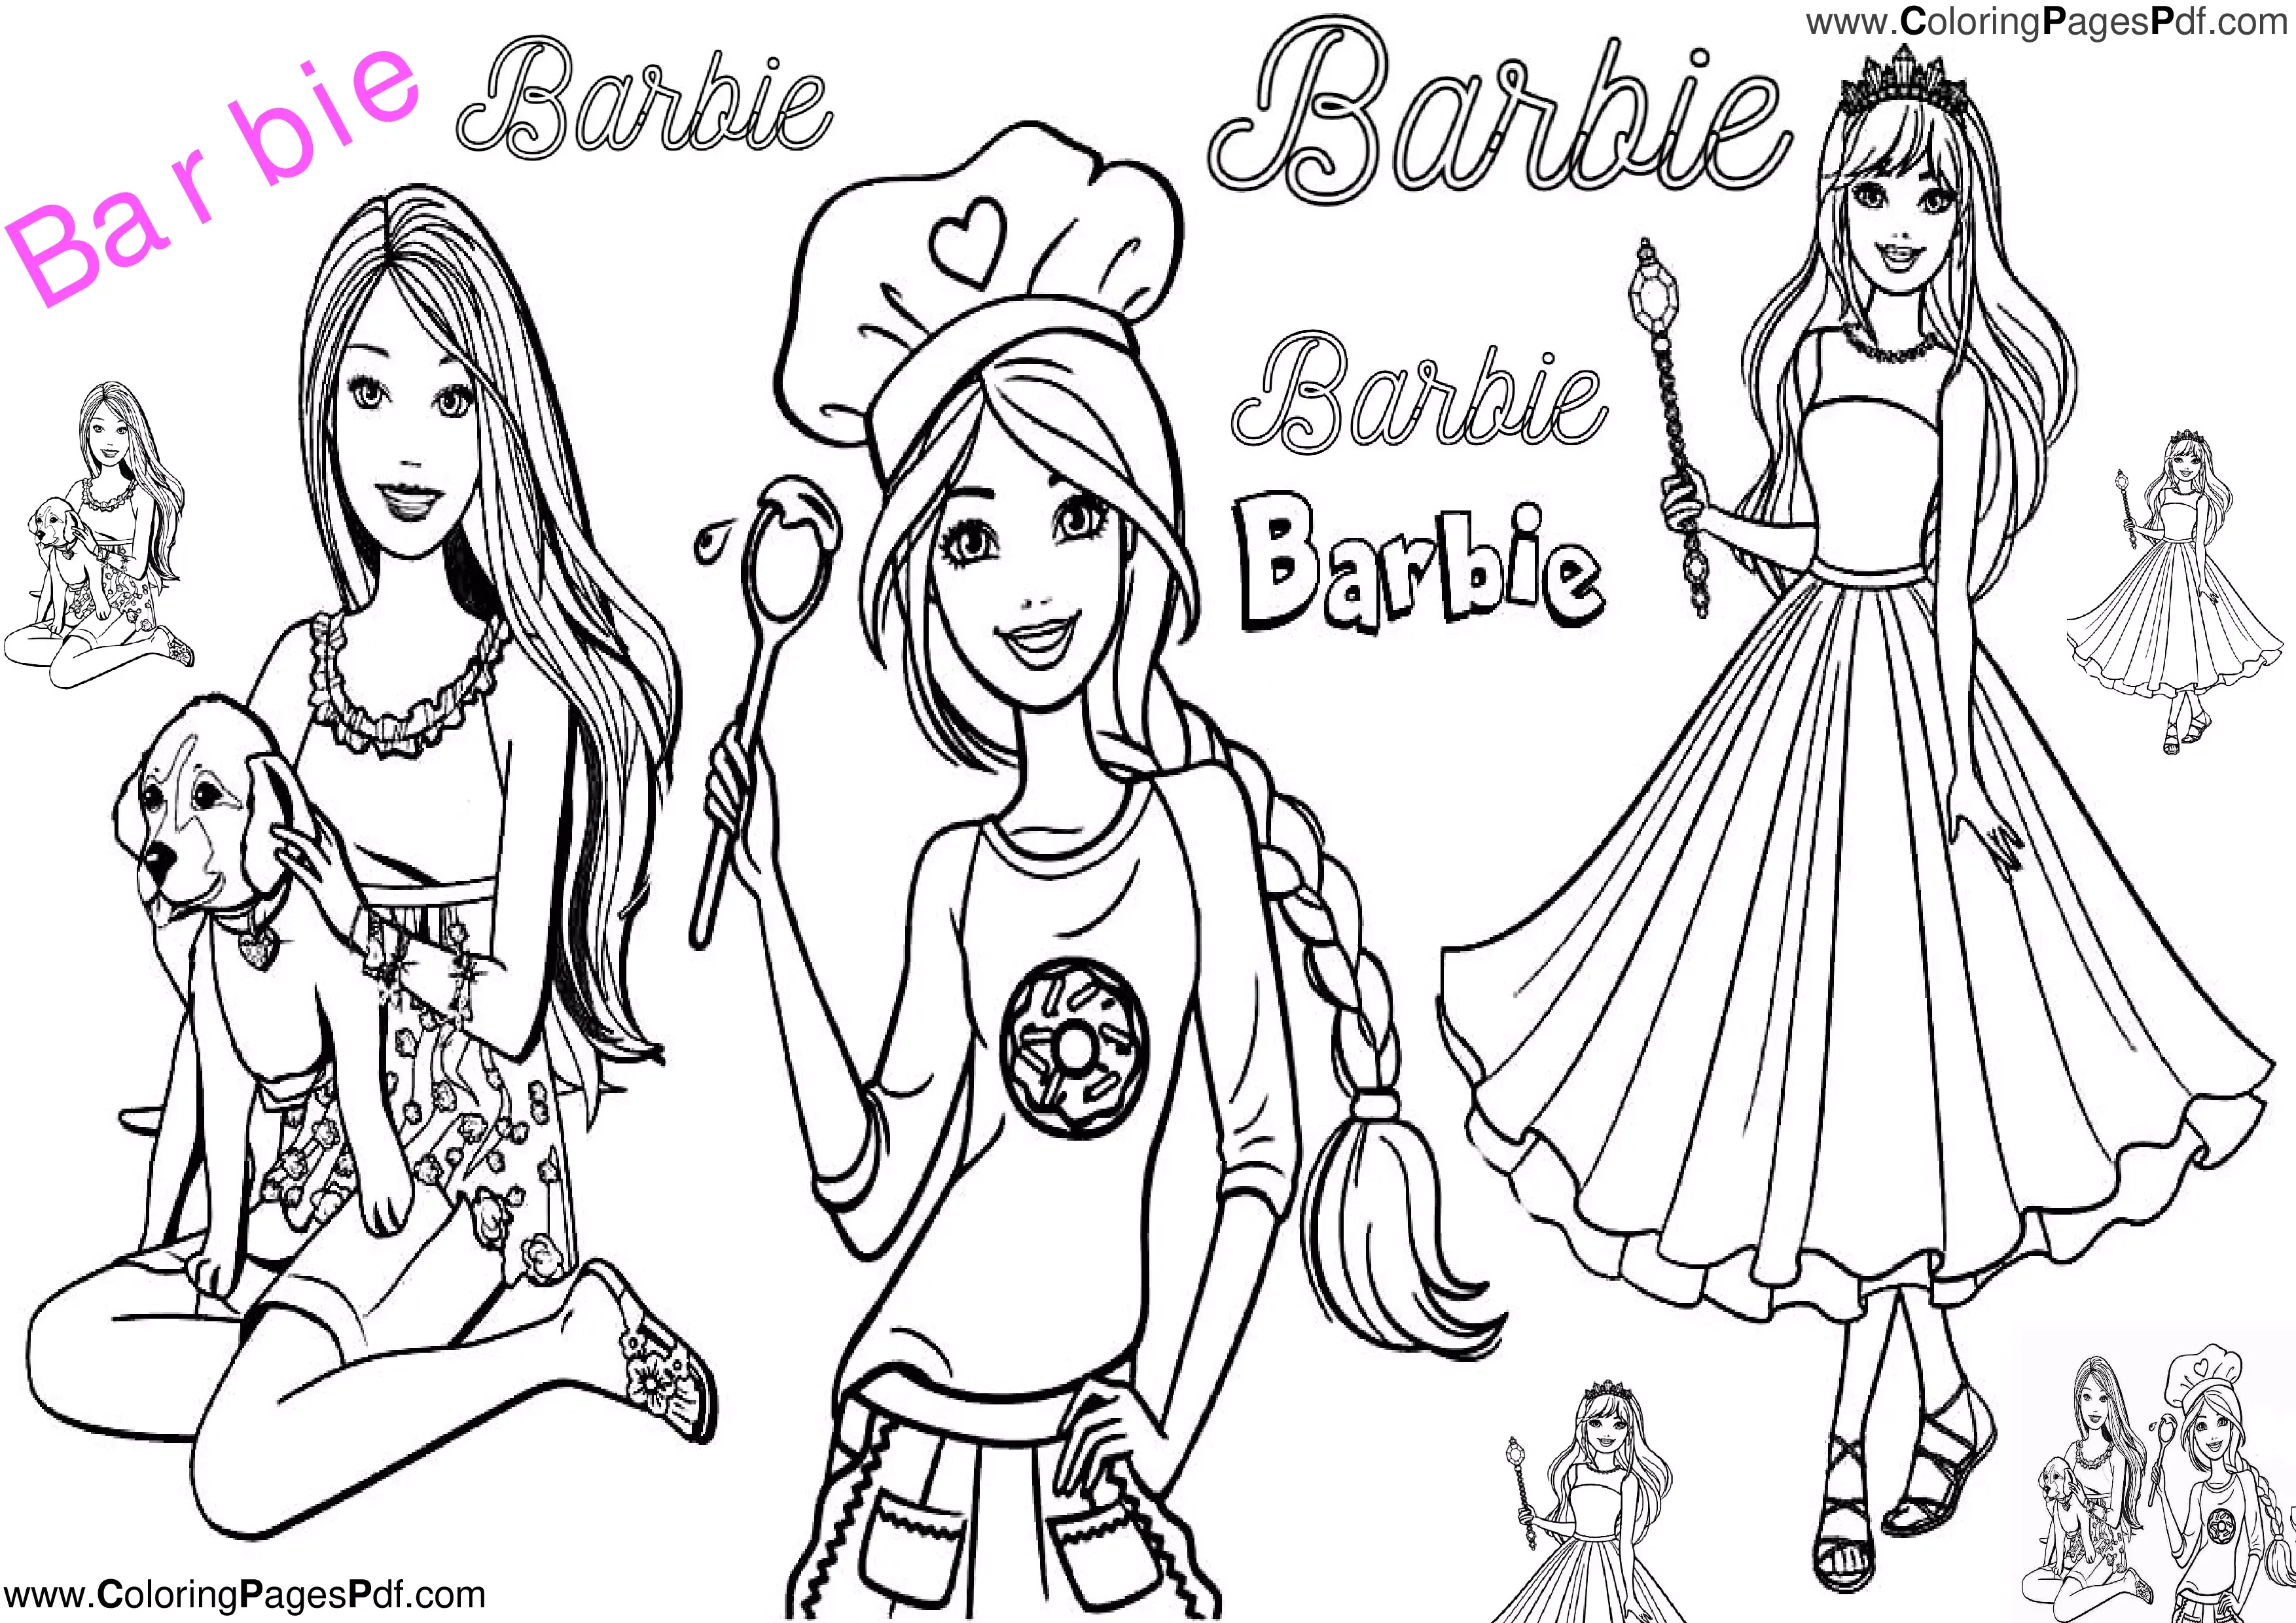 Barbie coloring pages online